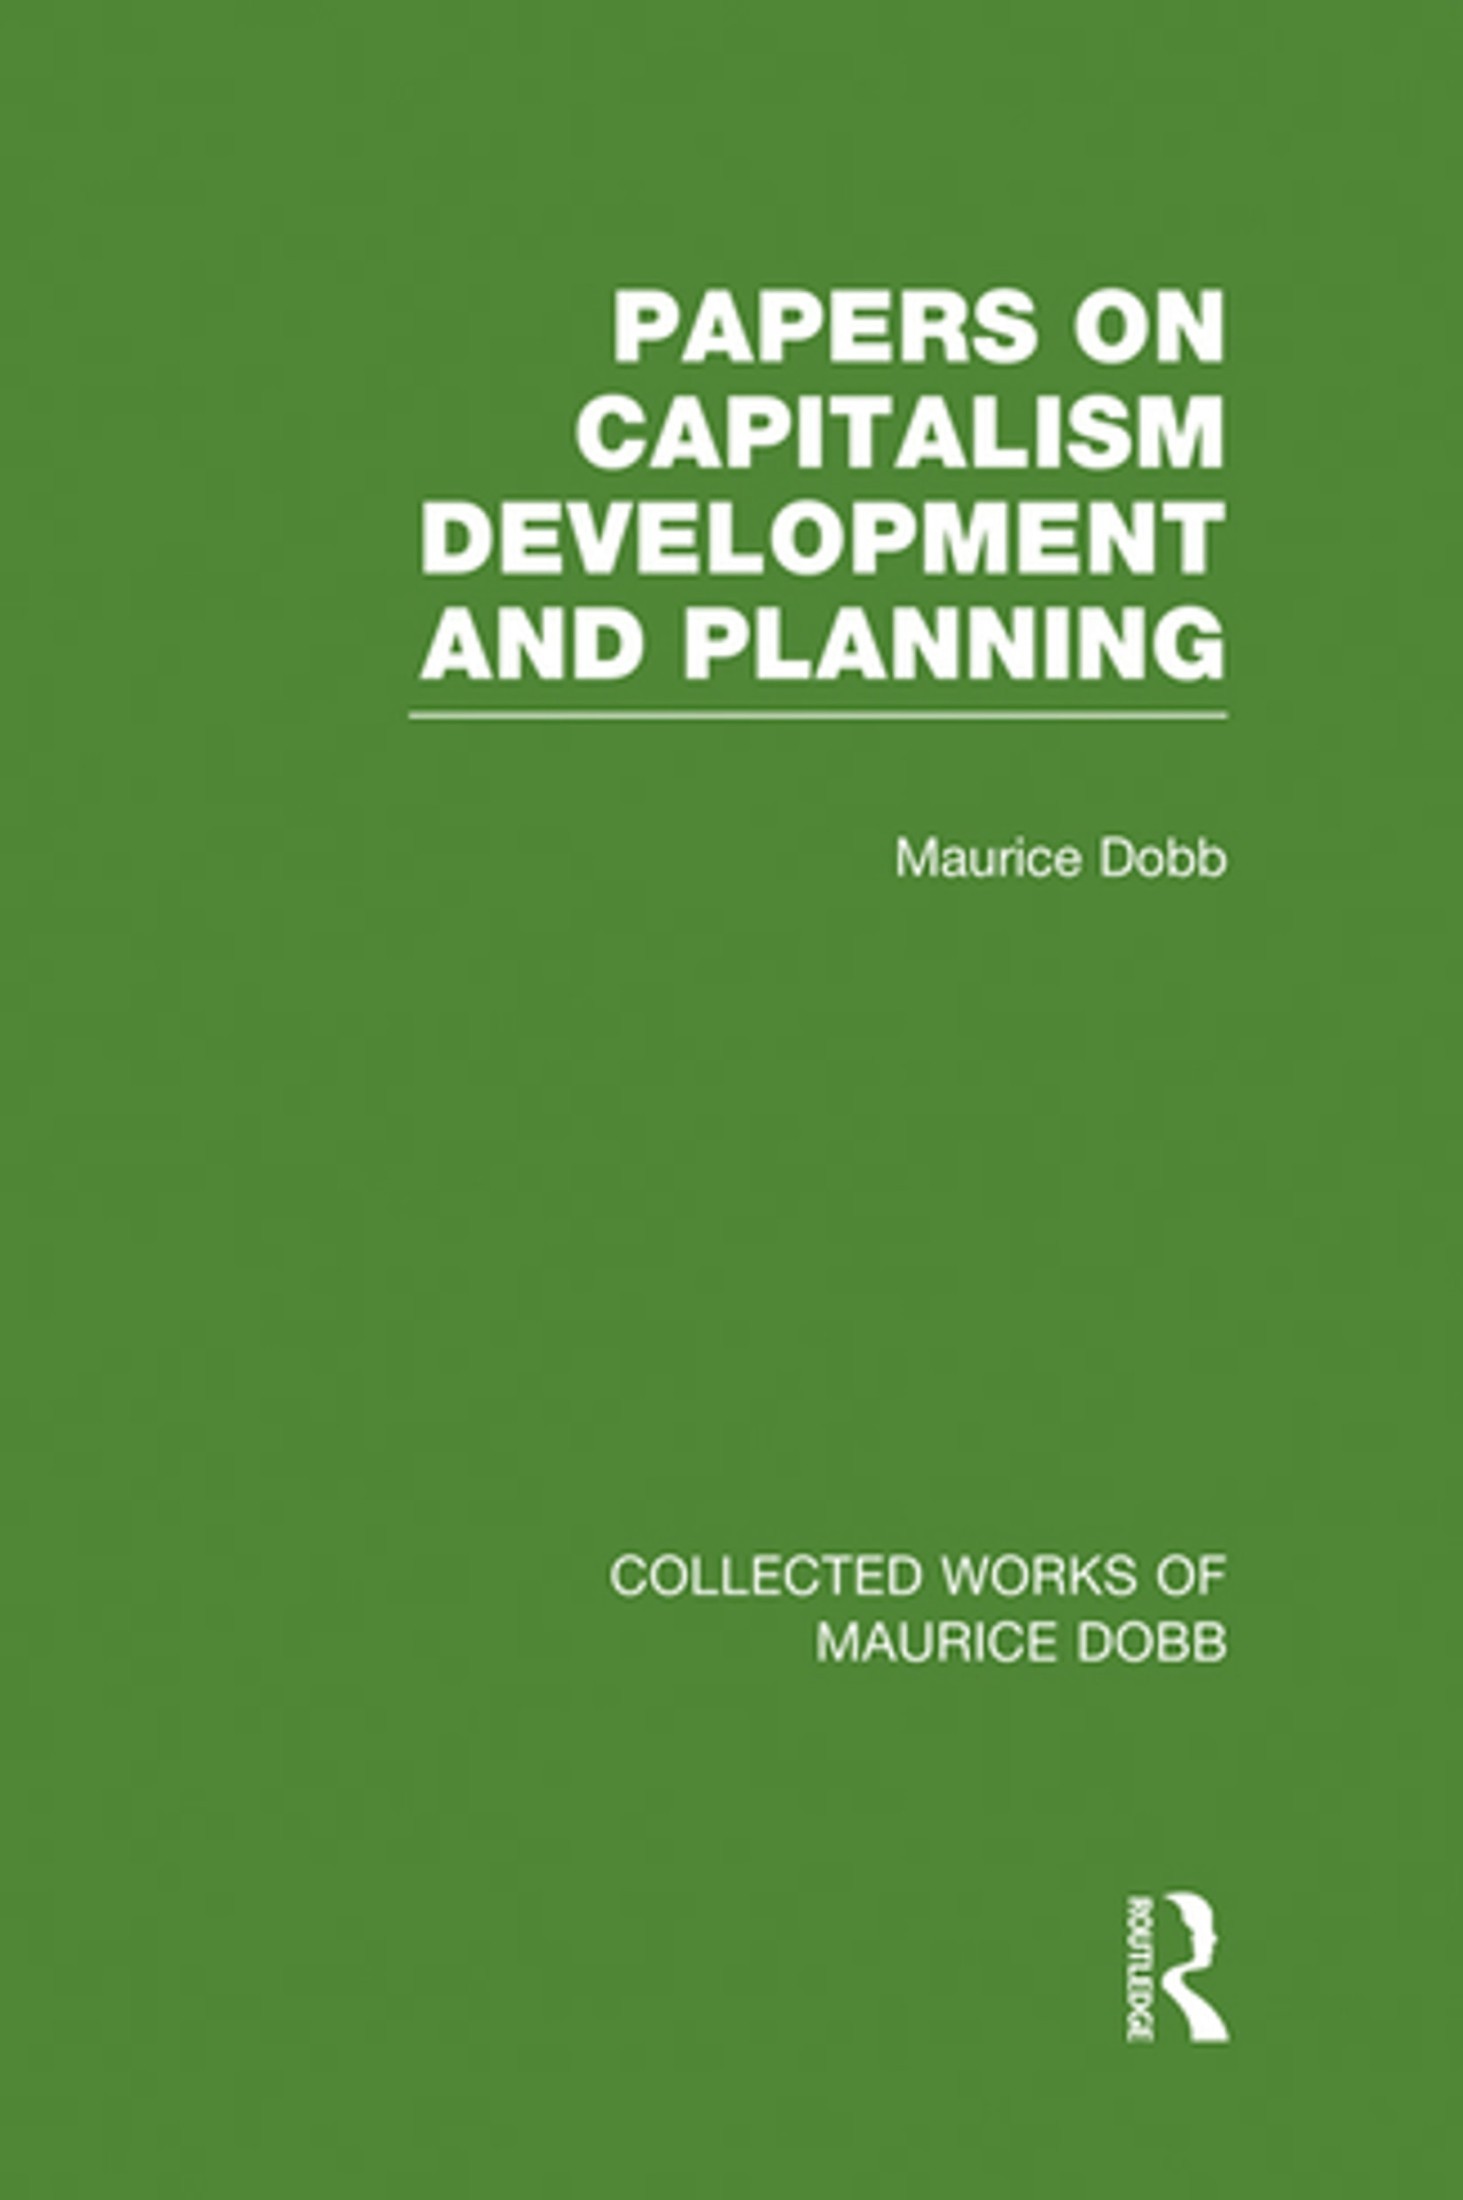 Collected Works of Maurice Dobb: Political Economy and Capitalism: Some Essays in Economic Tradition